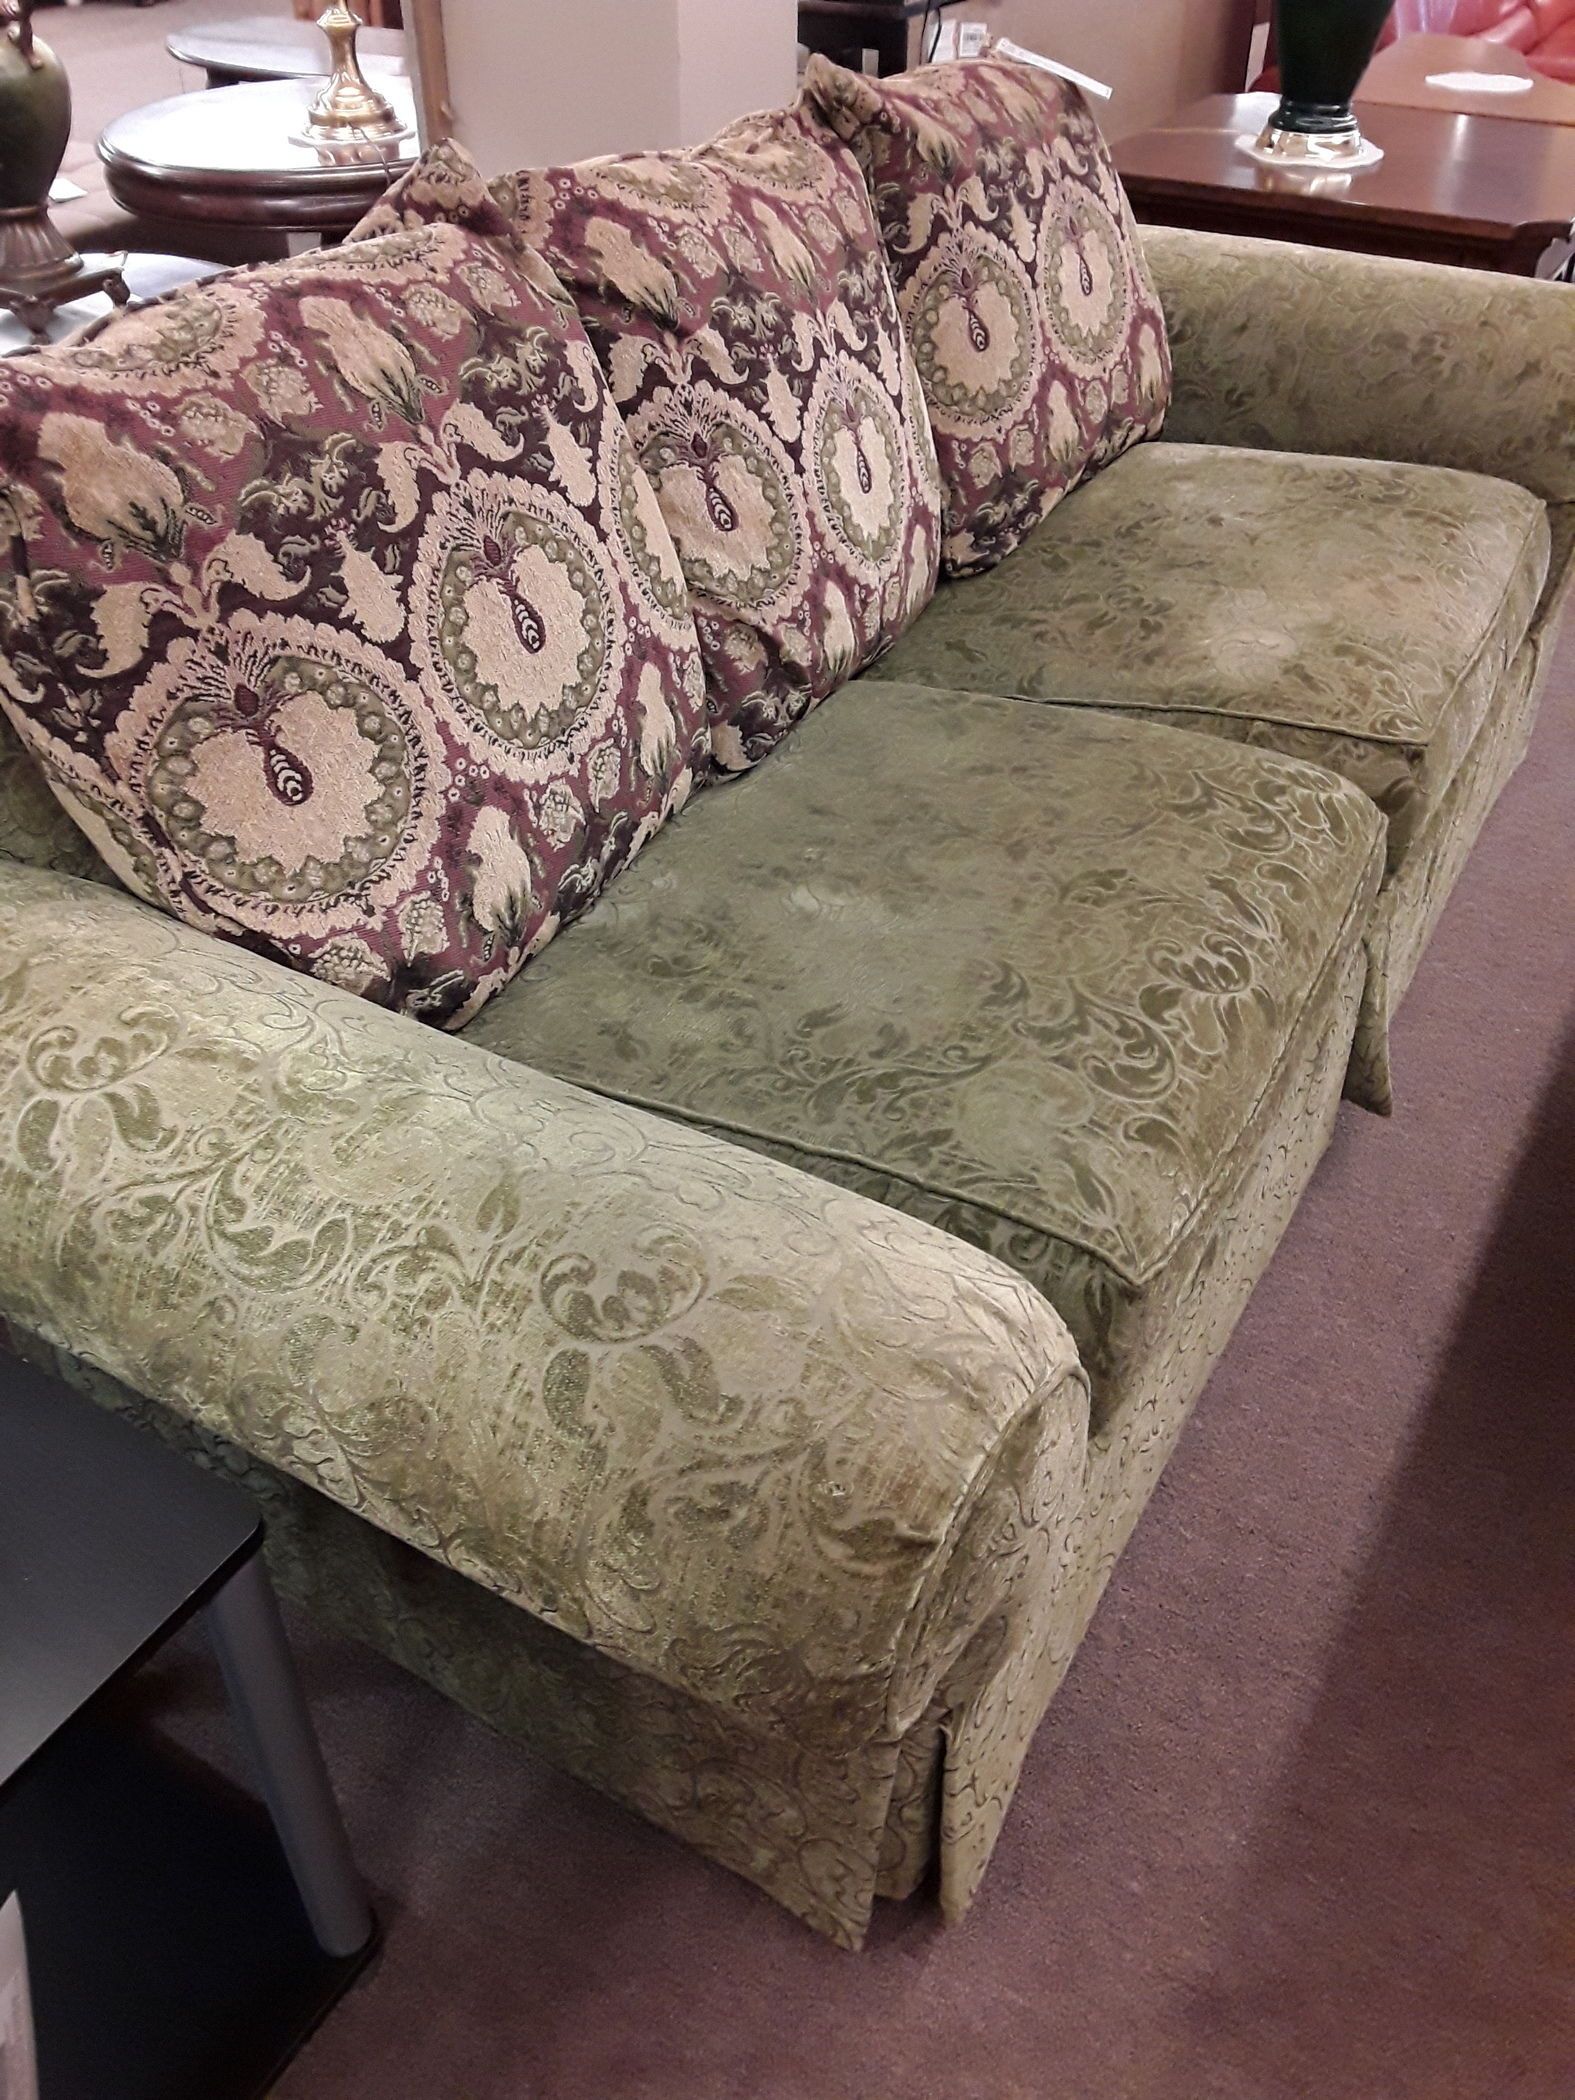 Thomasville Pillow Back Sofa | Delmarva Furniture Consignment Intended For Sofas With Pillowback Wood Bases (View 2 of 20)